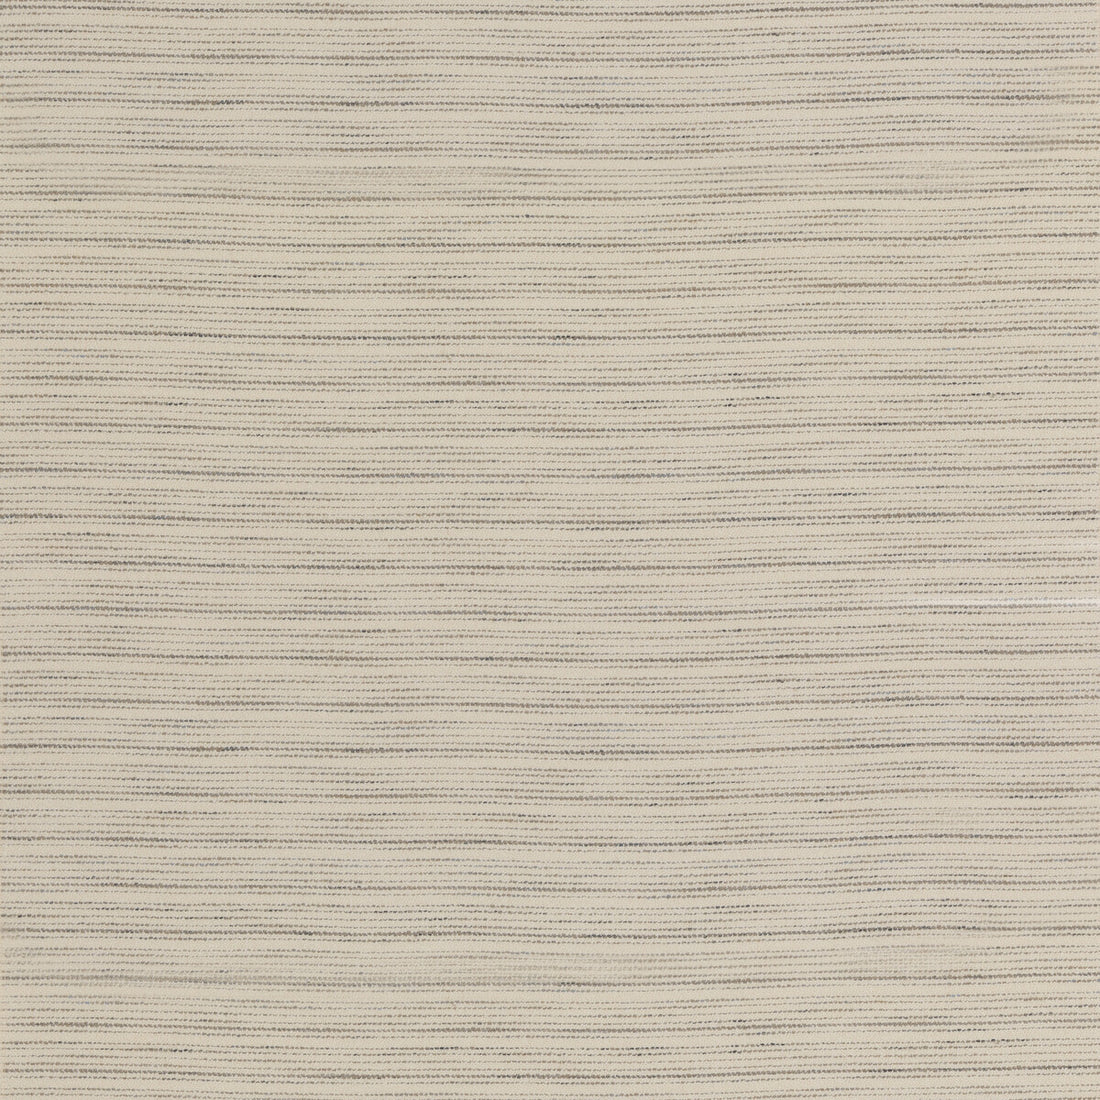 Lacuna fabric in ivory color - pattern ED85376.104.0 - by Threads in the Quintessential Textures collection